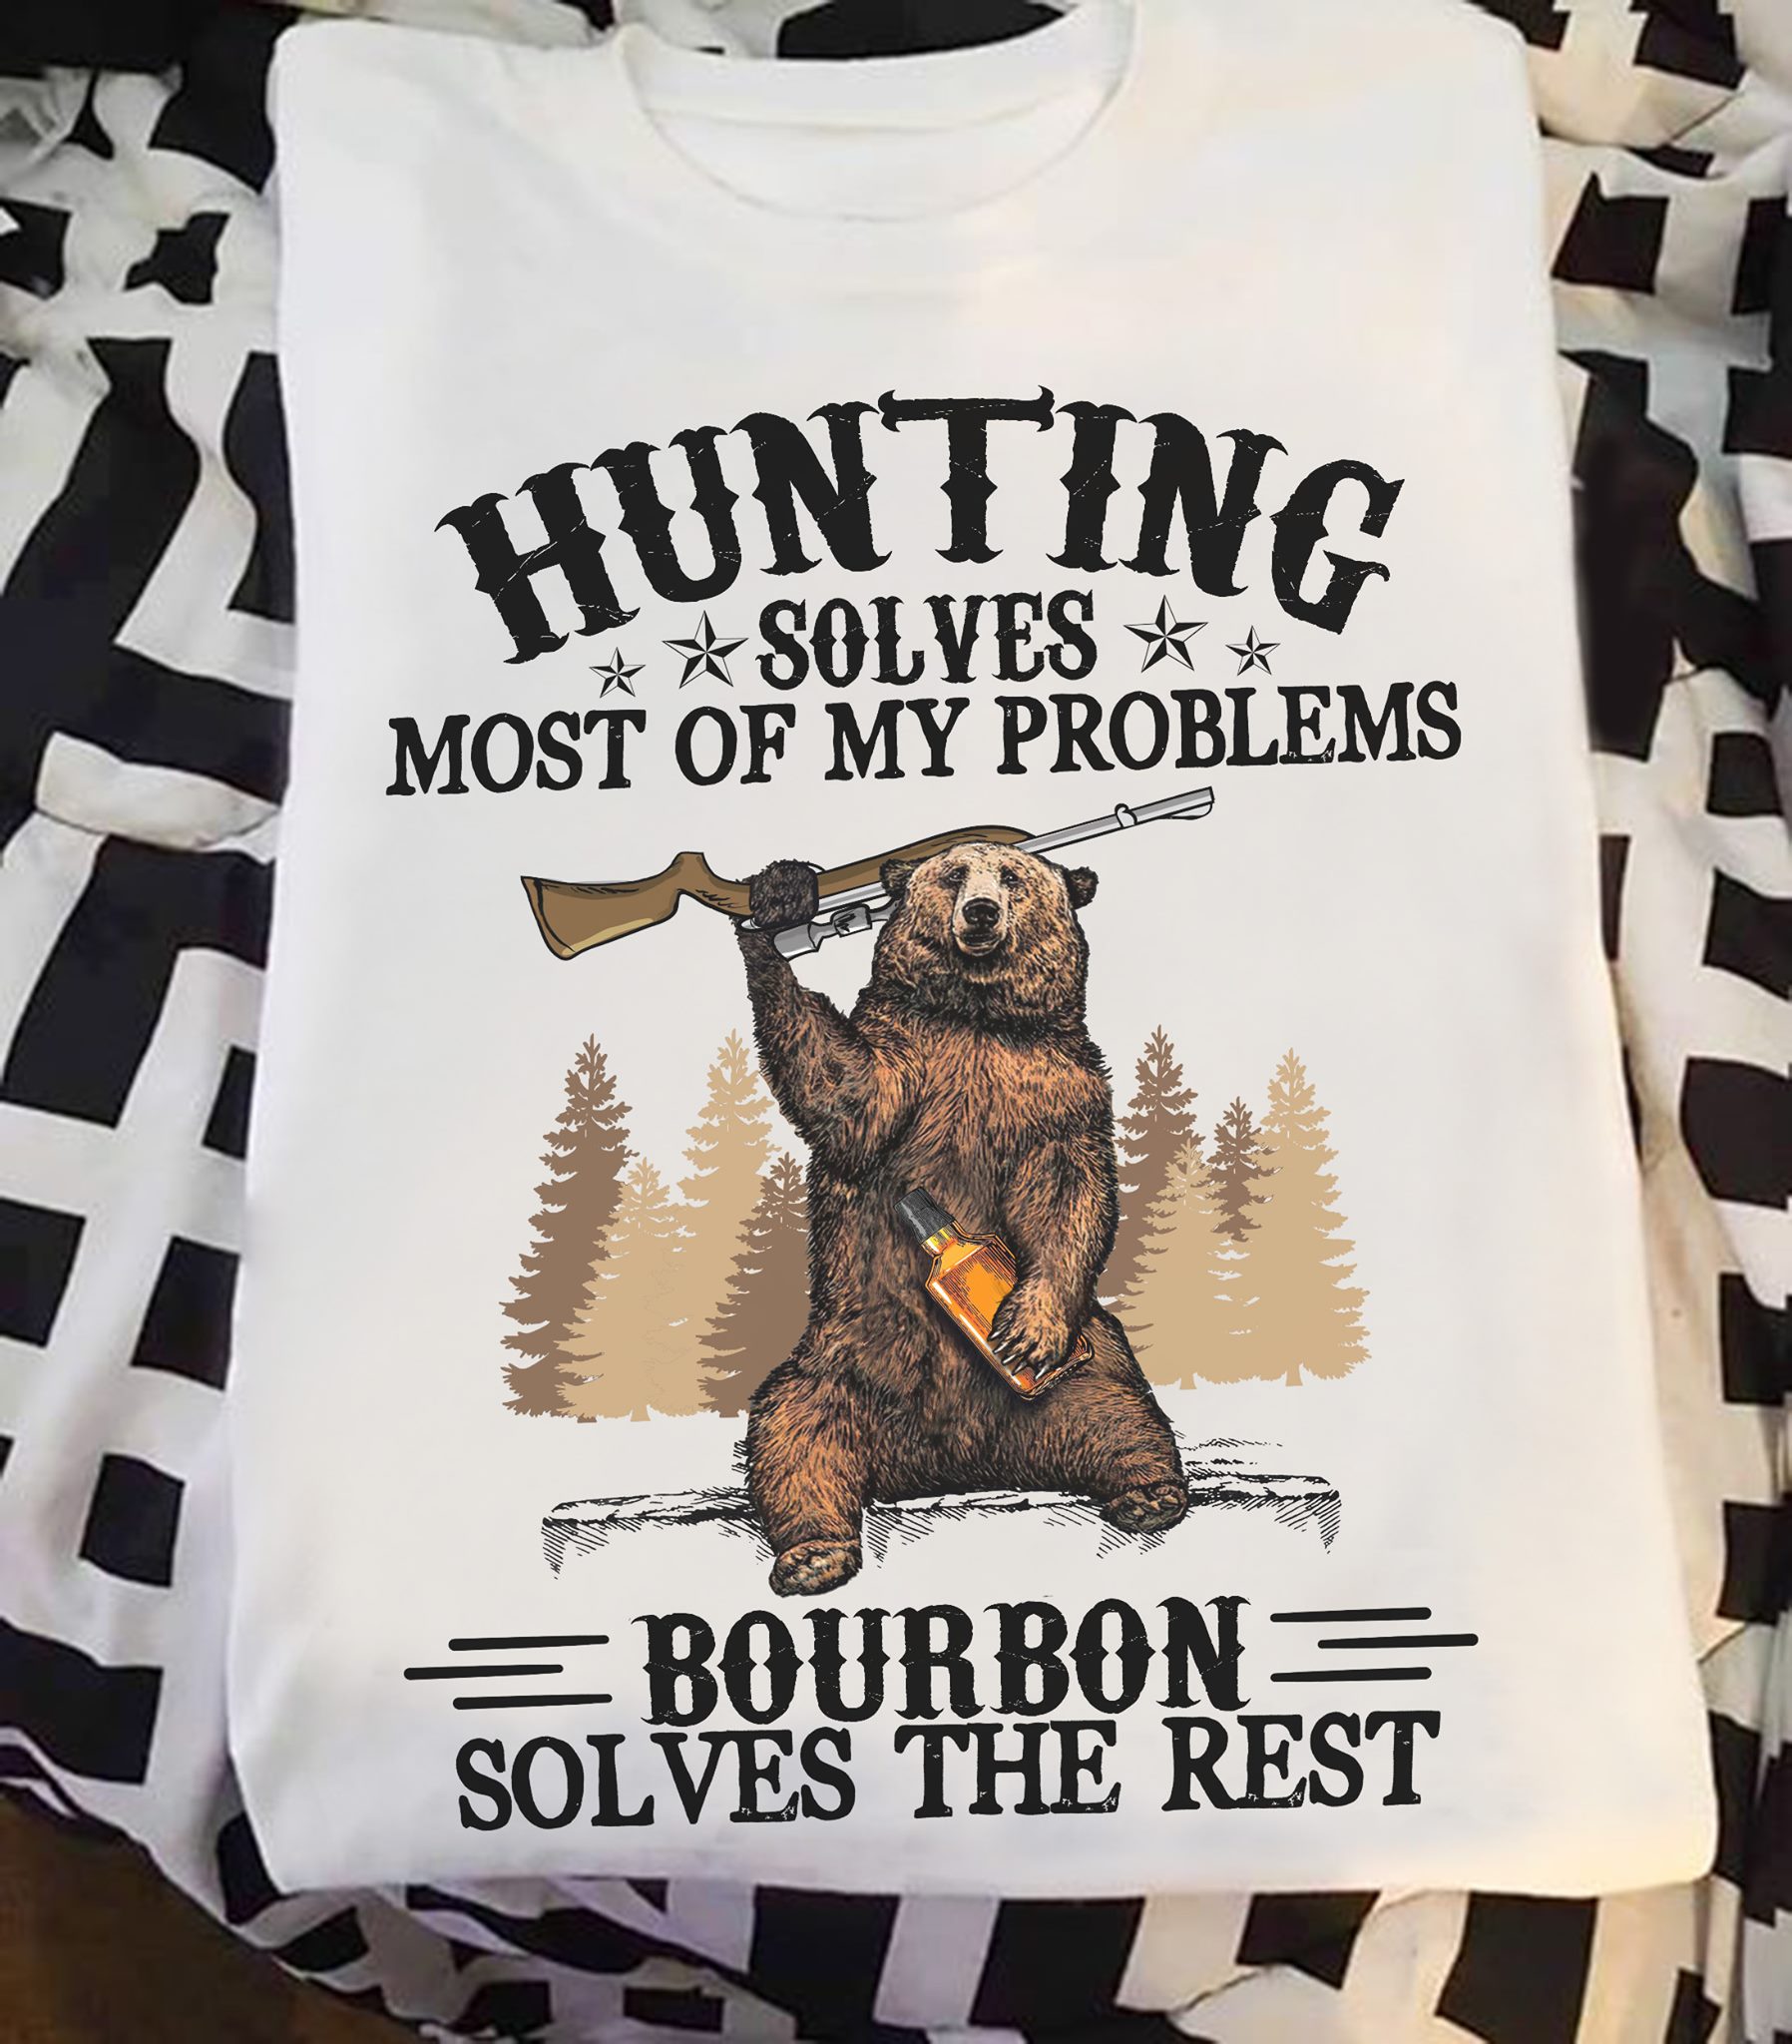 Hunting solves most of my problems bourbon solves the rest - Hunting bear